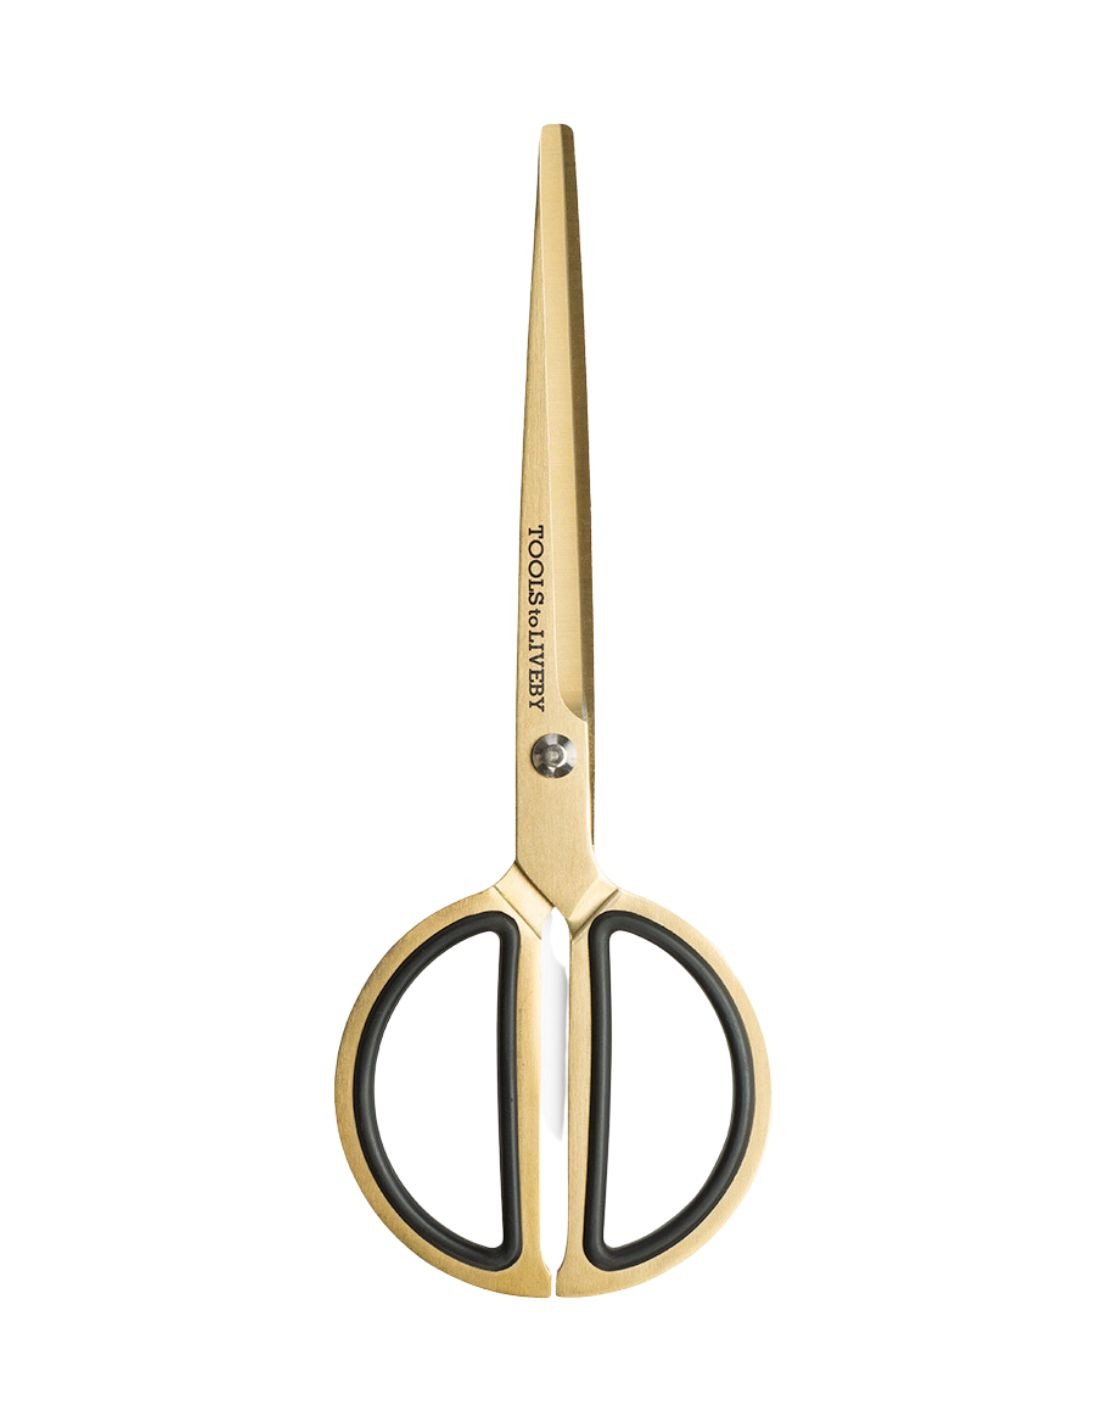 Tools to Liveby 3 Scissors - Gold